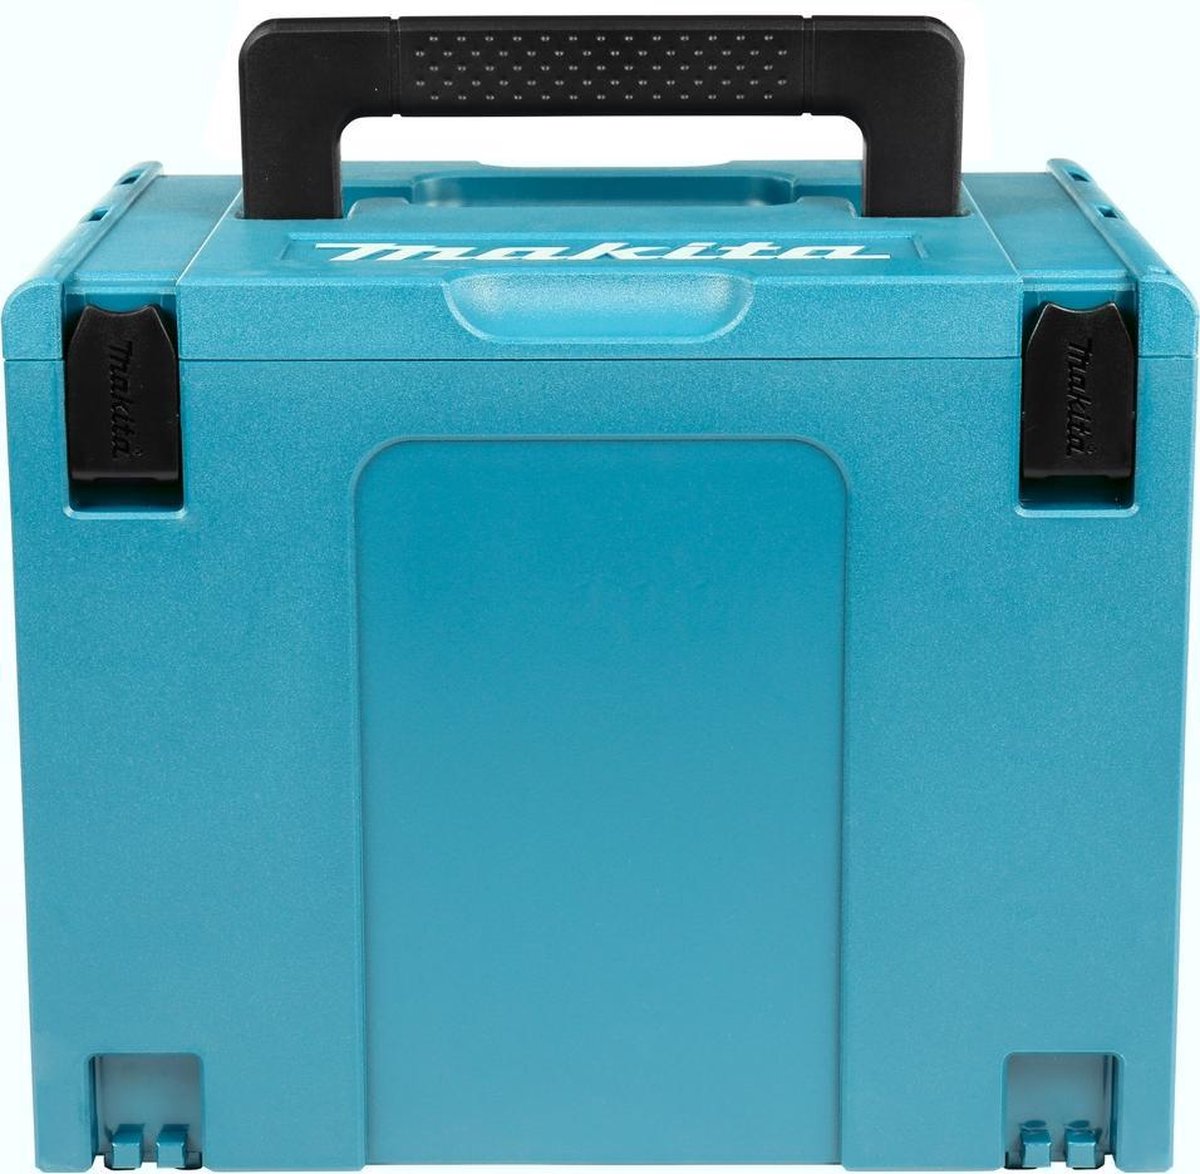 Makita 821552-6 Systainer Makpac IV - Mbox nummer 4 - Exclusief gereedschap  | bol.com